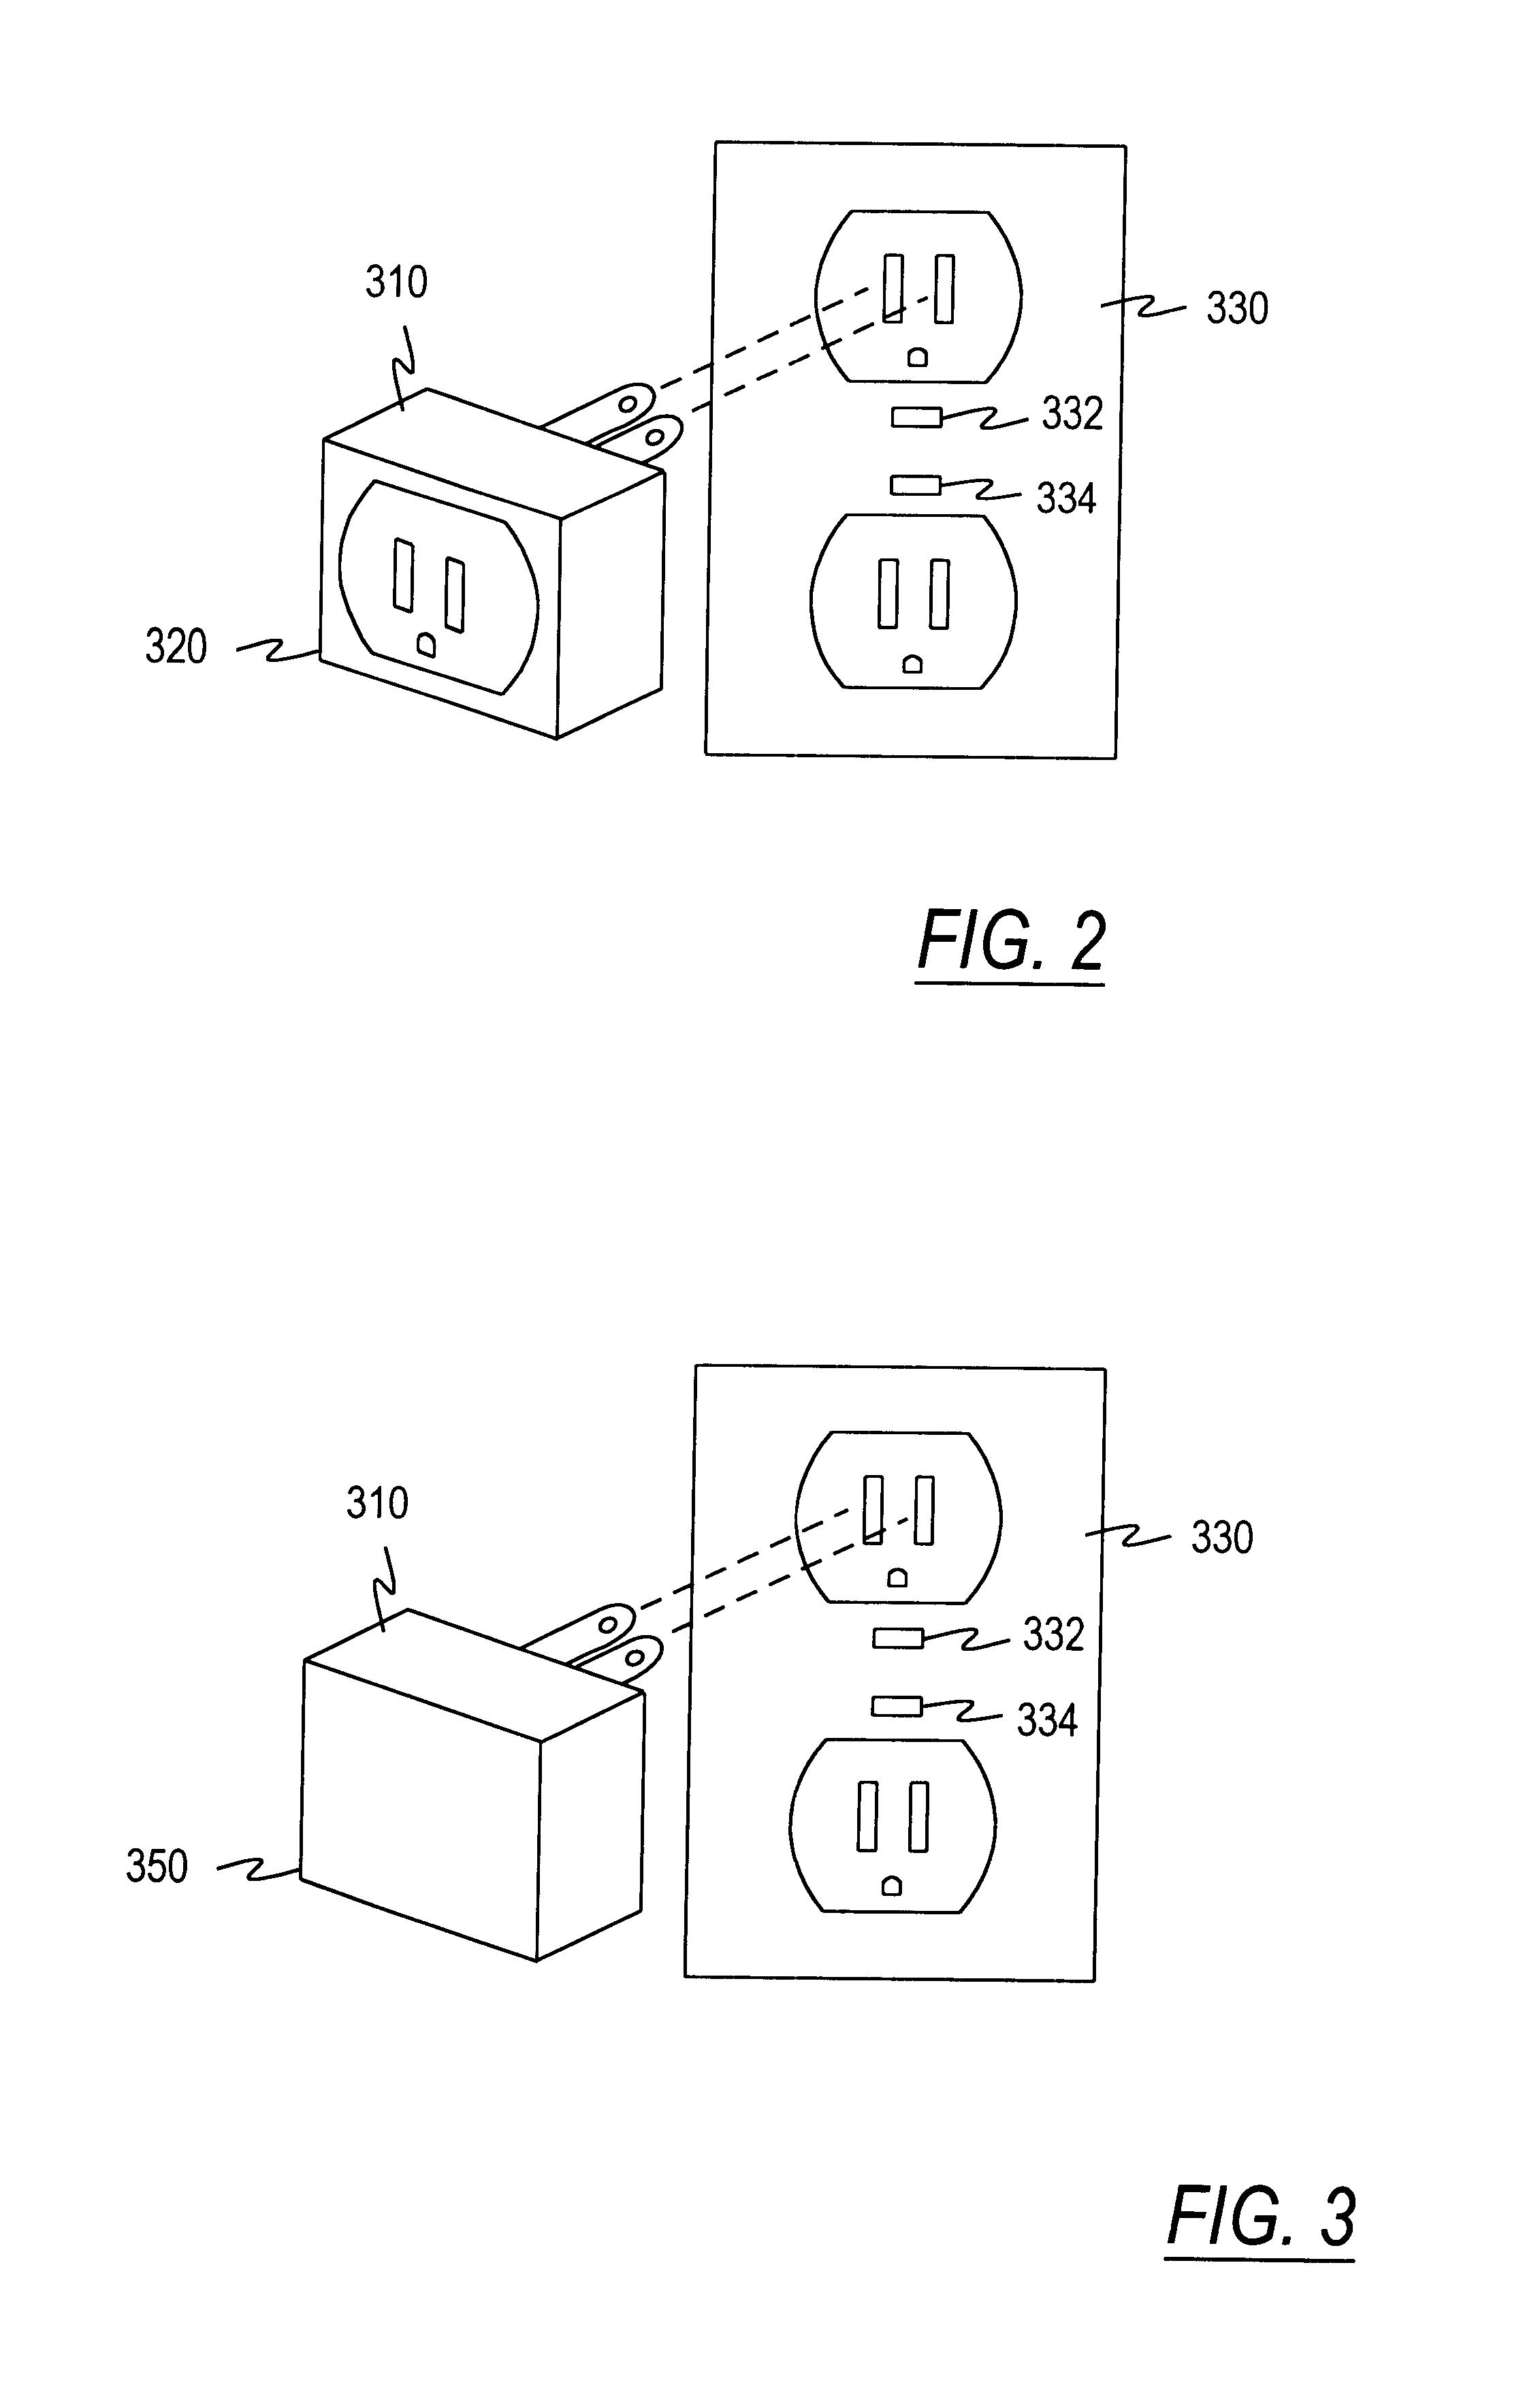 Blocking/inhibiting operation in an arc fault detection system